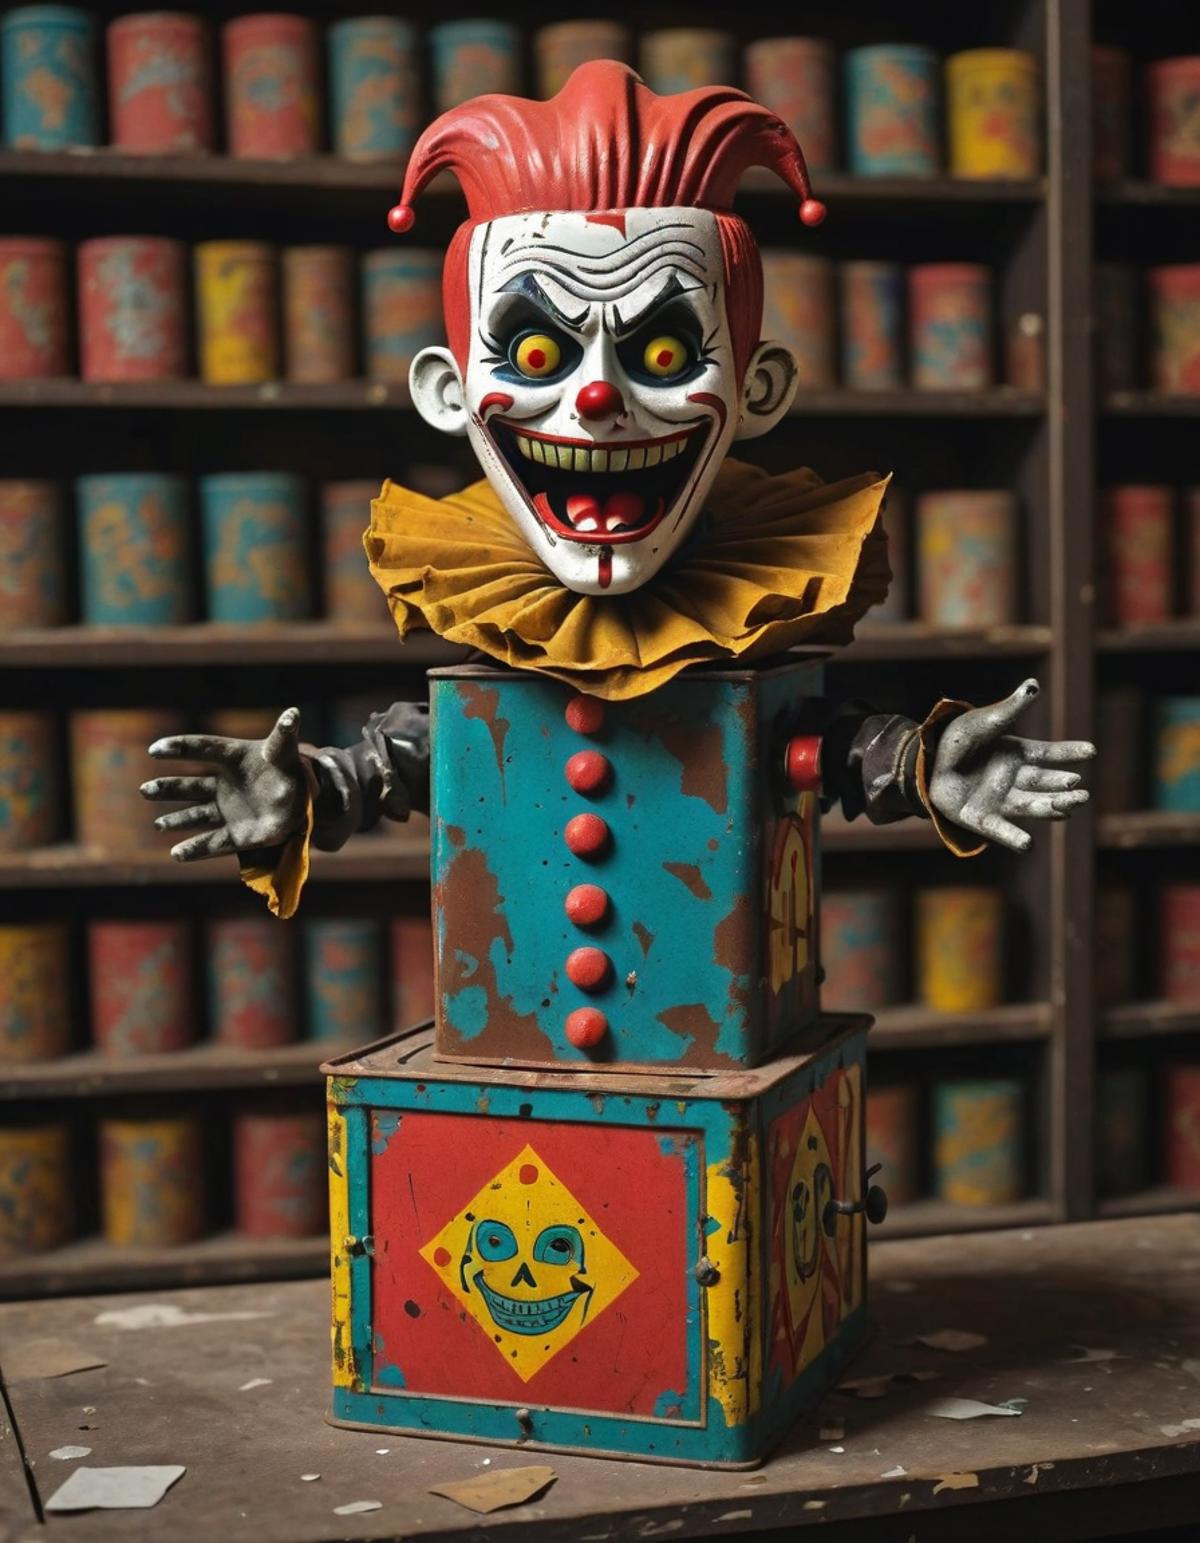 A creepy clown is standing in a container with a skull on it.